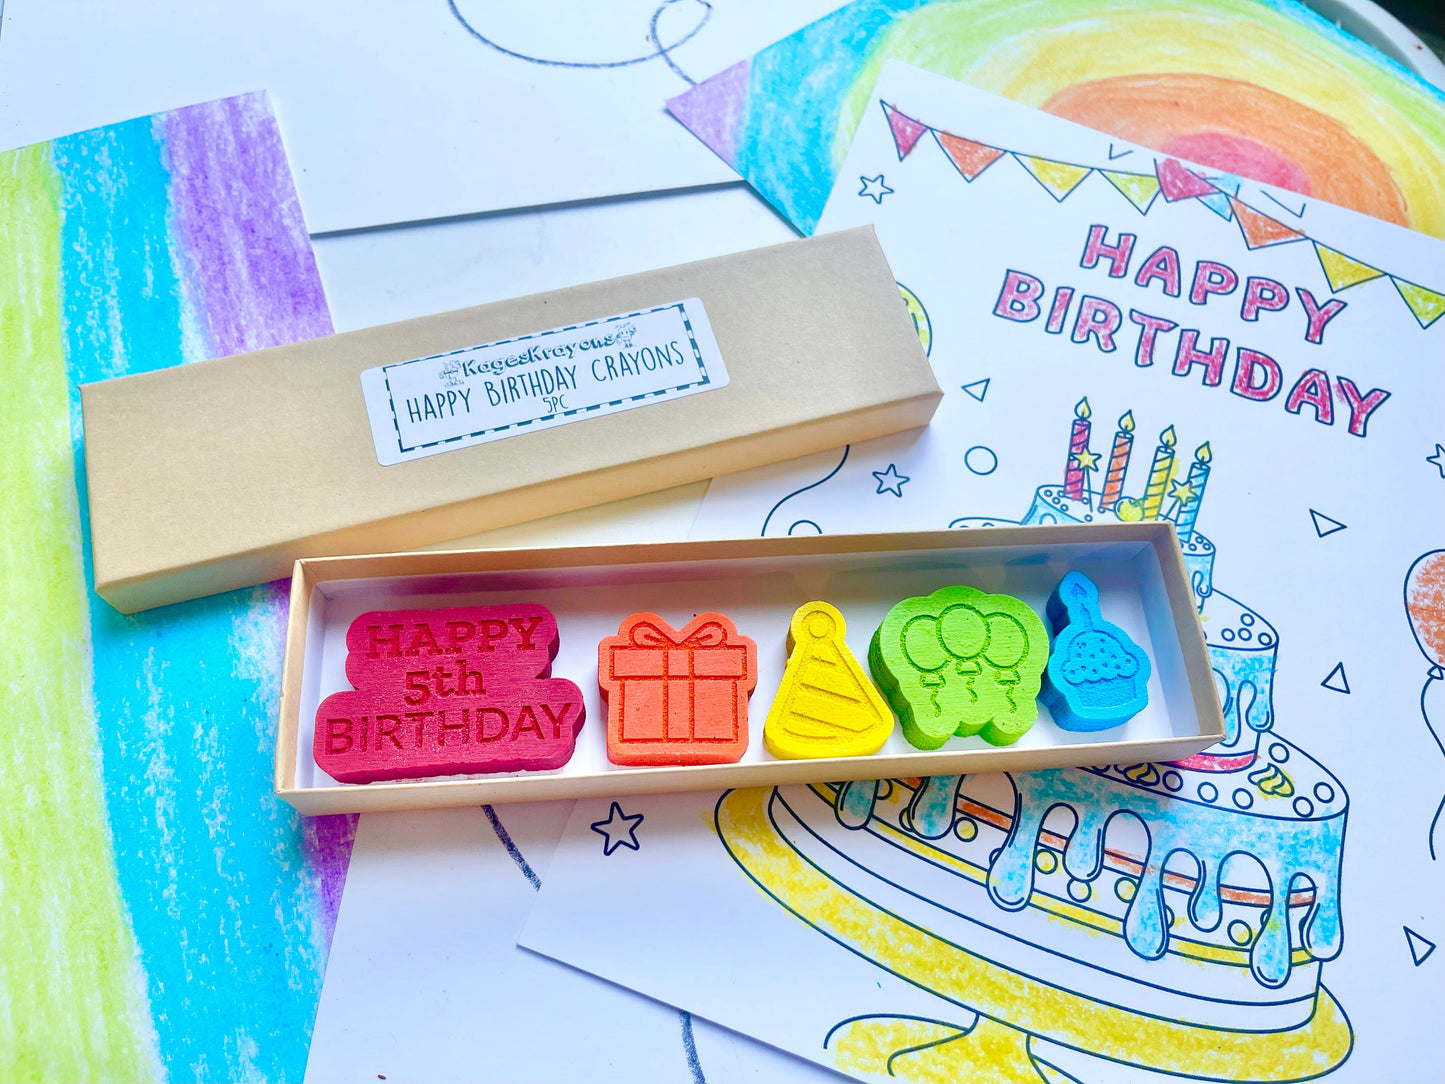 5th Birthday Crayons - 5th Birthday Gifts - Kids Happy Birthday Gifts - Kids Birthday Presents - Gifts For Kids - 5th Birthday Party Favors